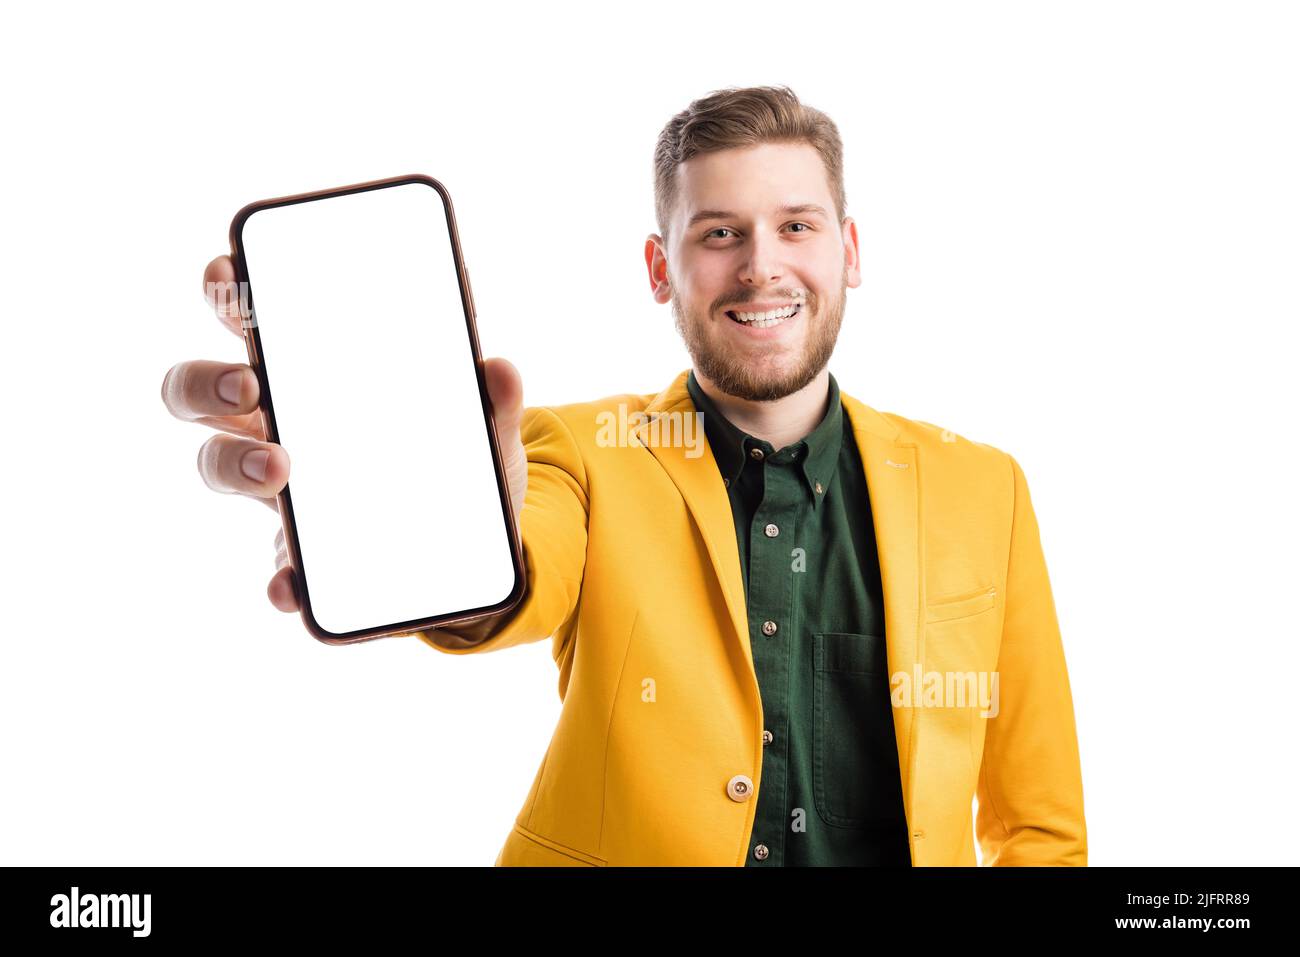 Man showing smartphone with empty screen Stock Photo